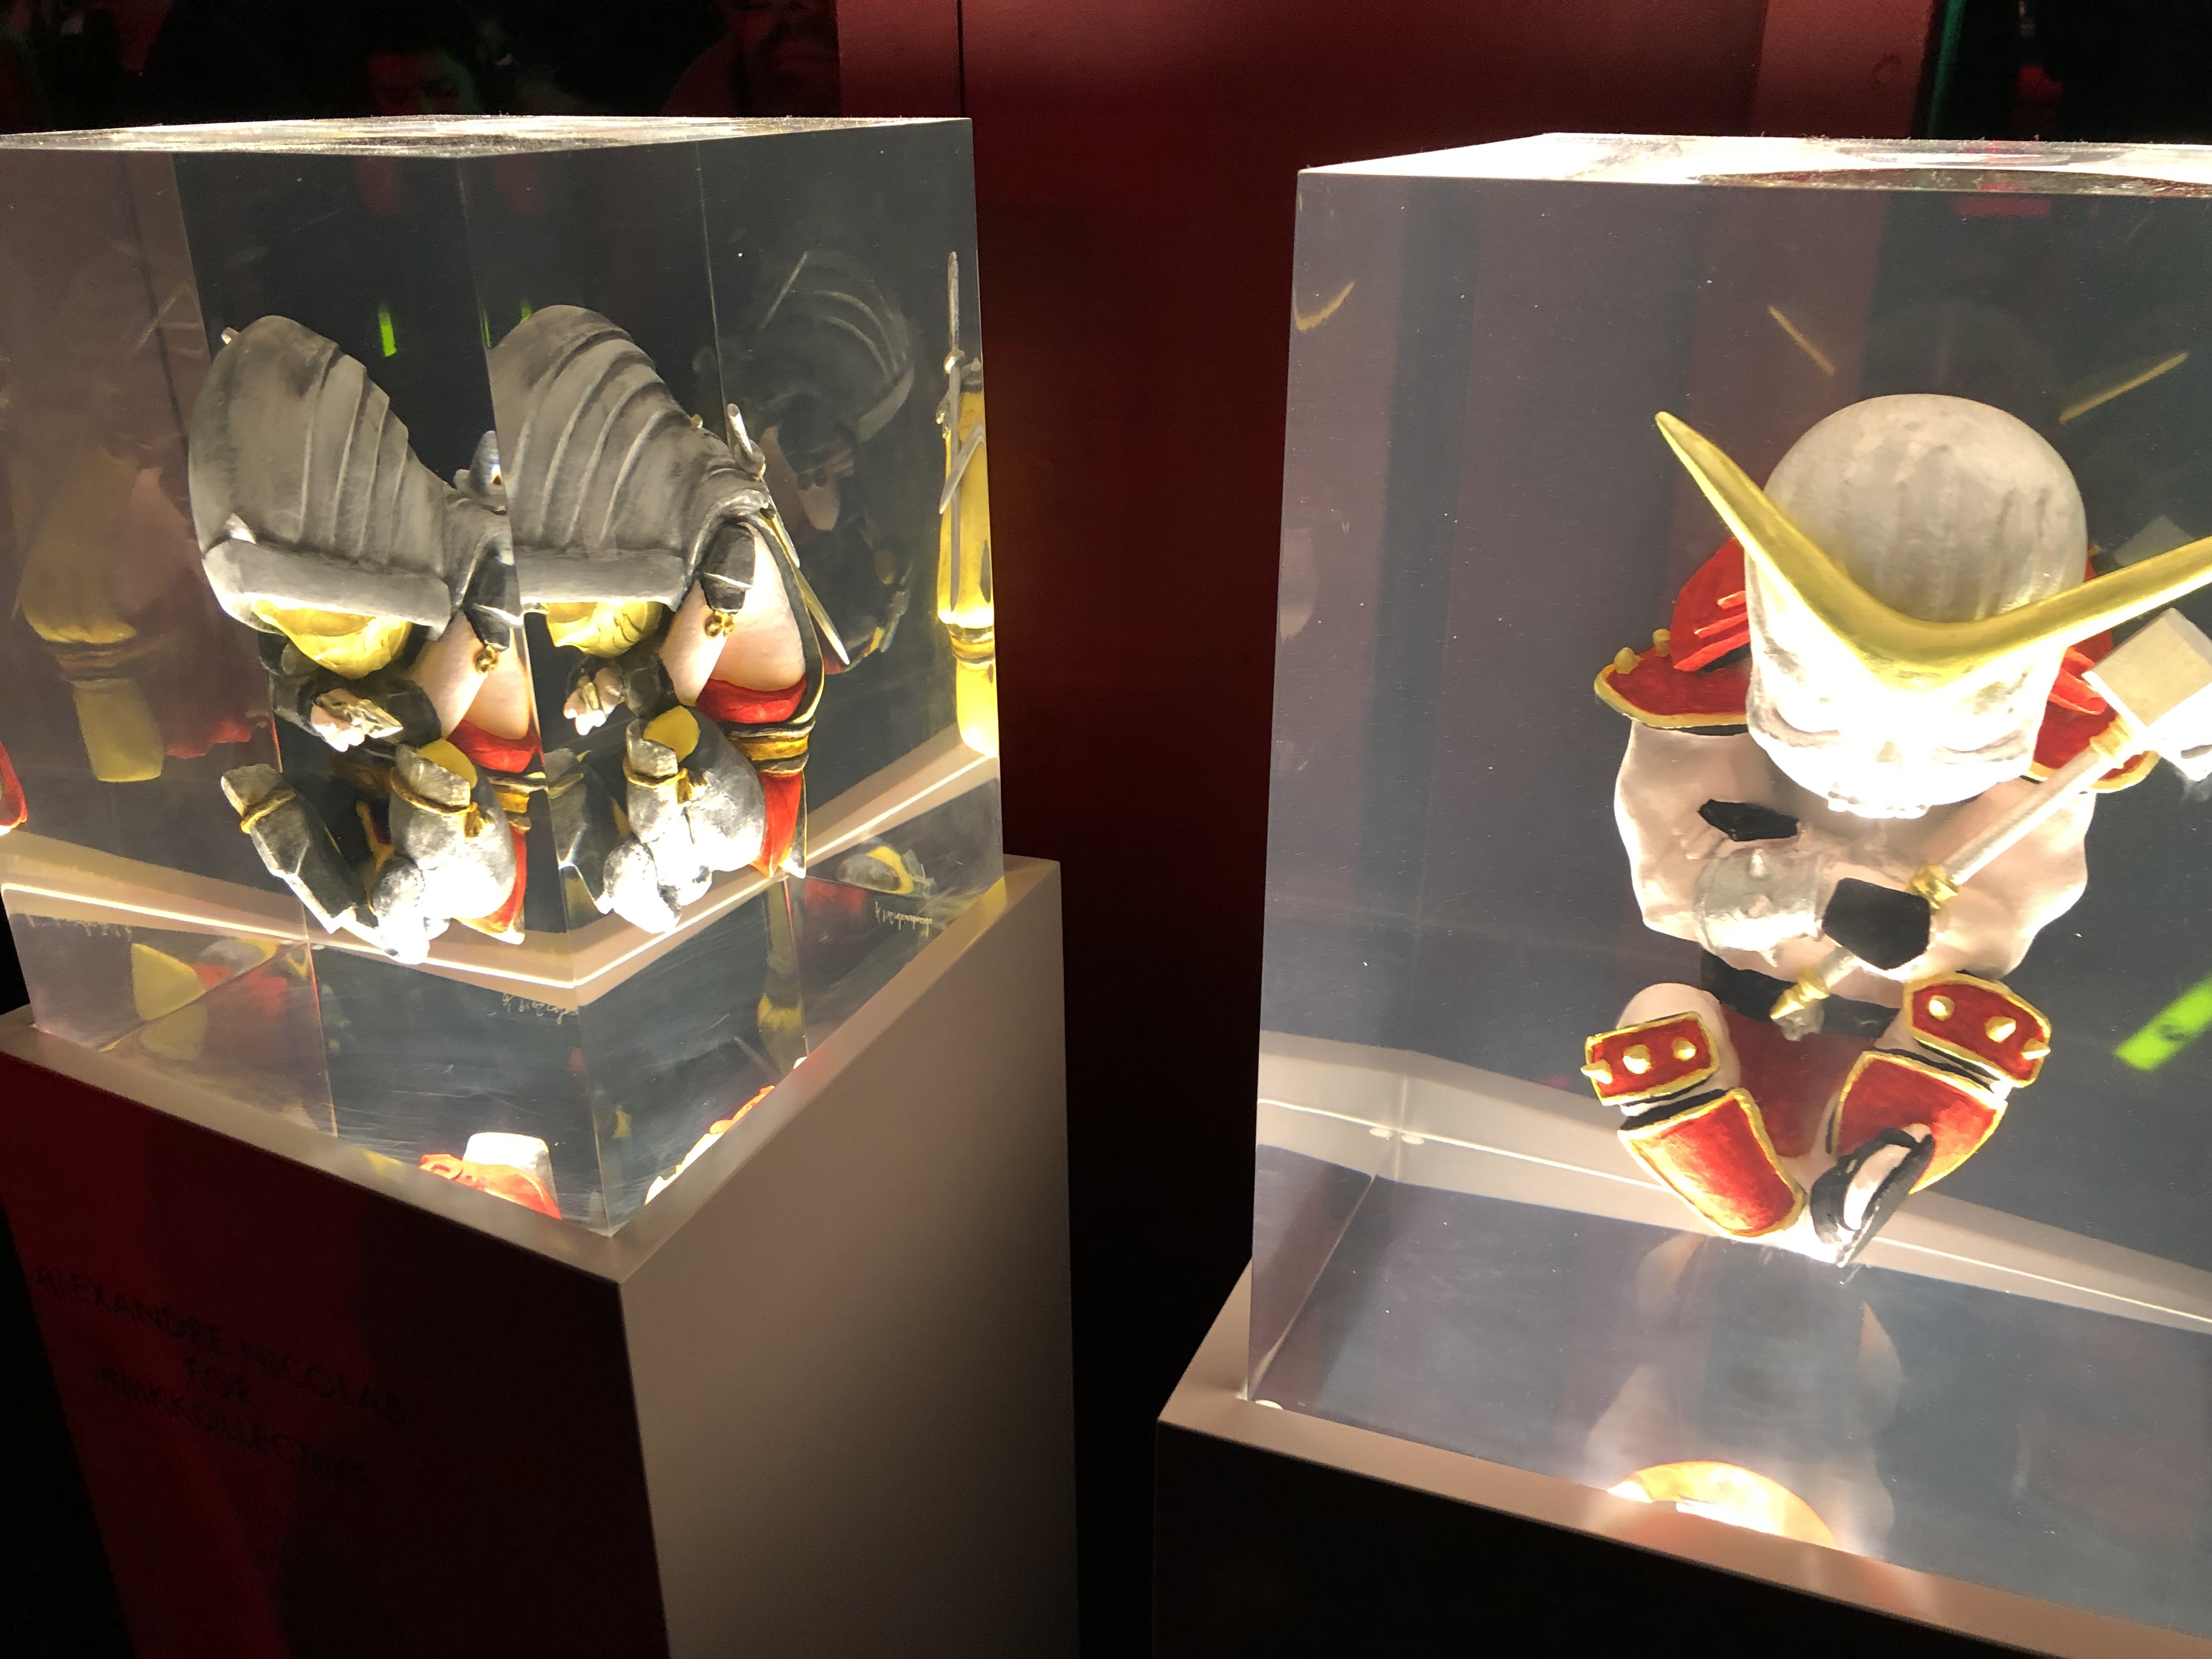 Mortal Kombat 11 figures are seen in glass boxes